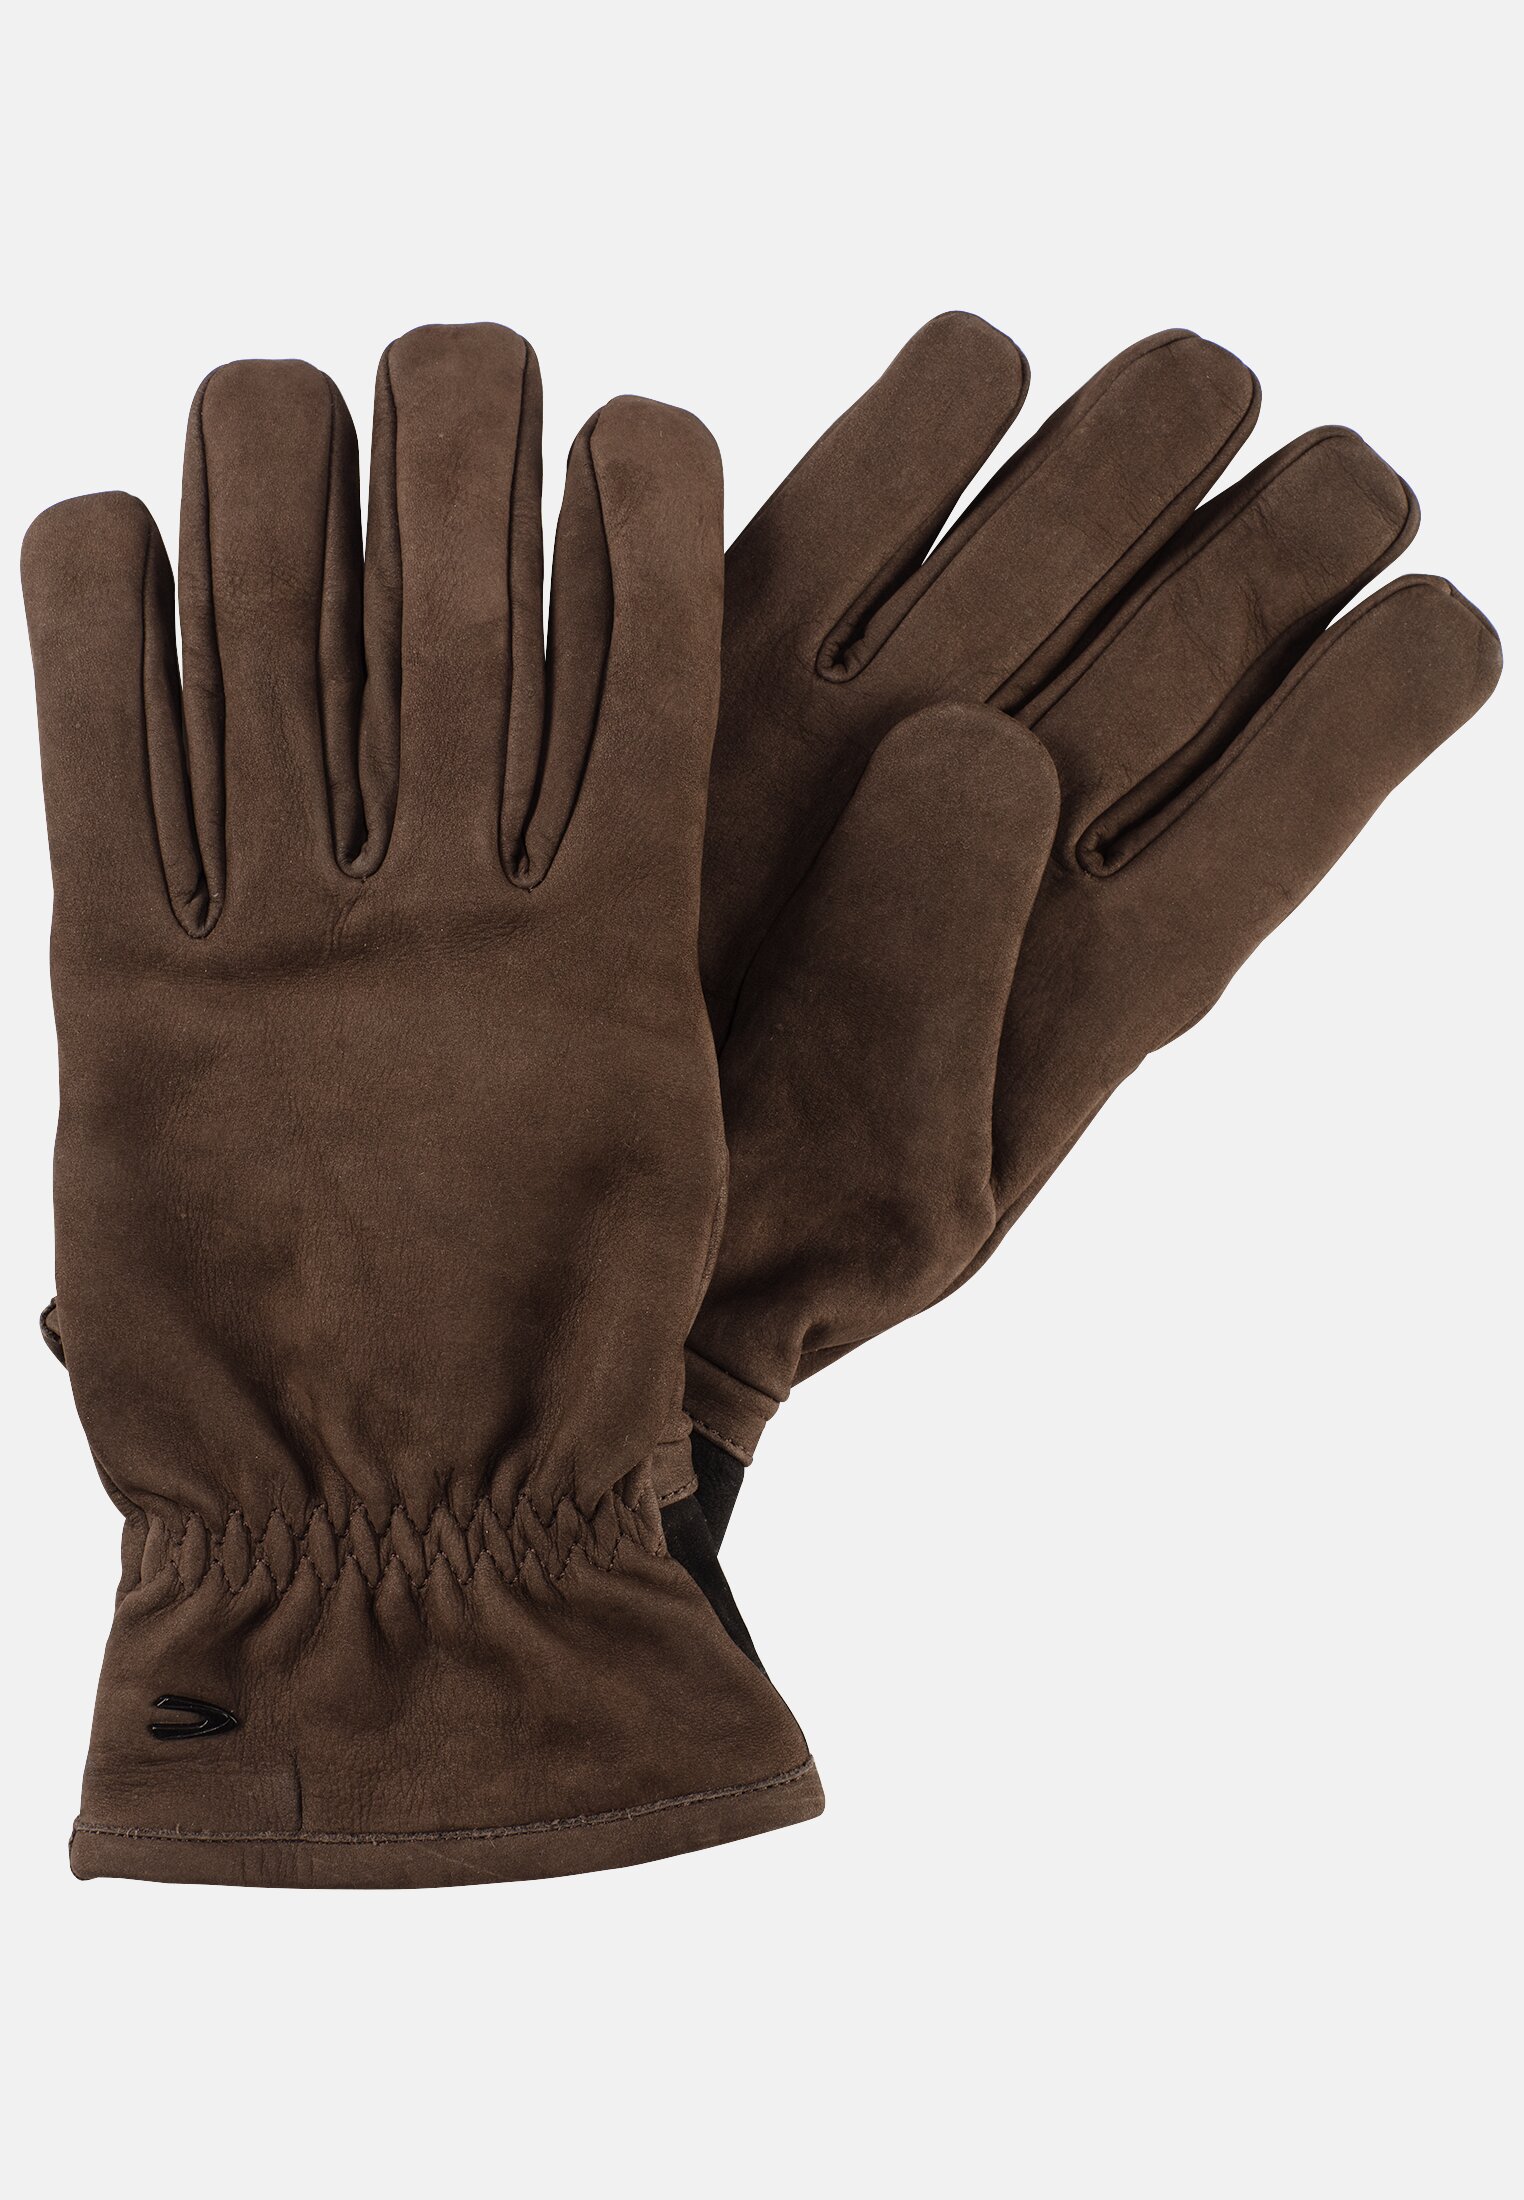 Camel Active High quality leather gloves in a gift box